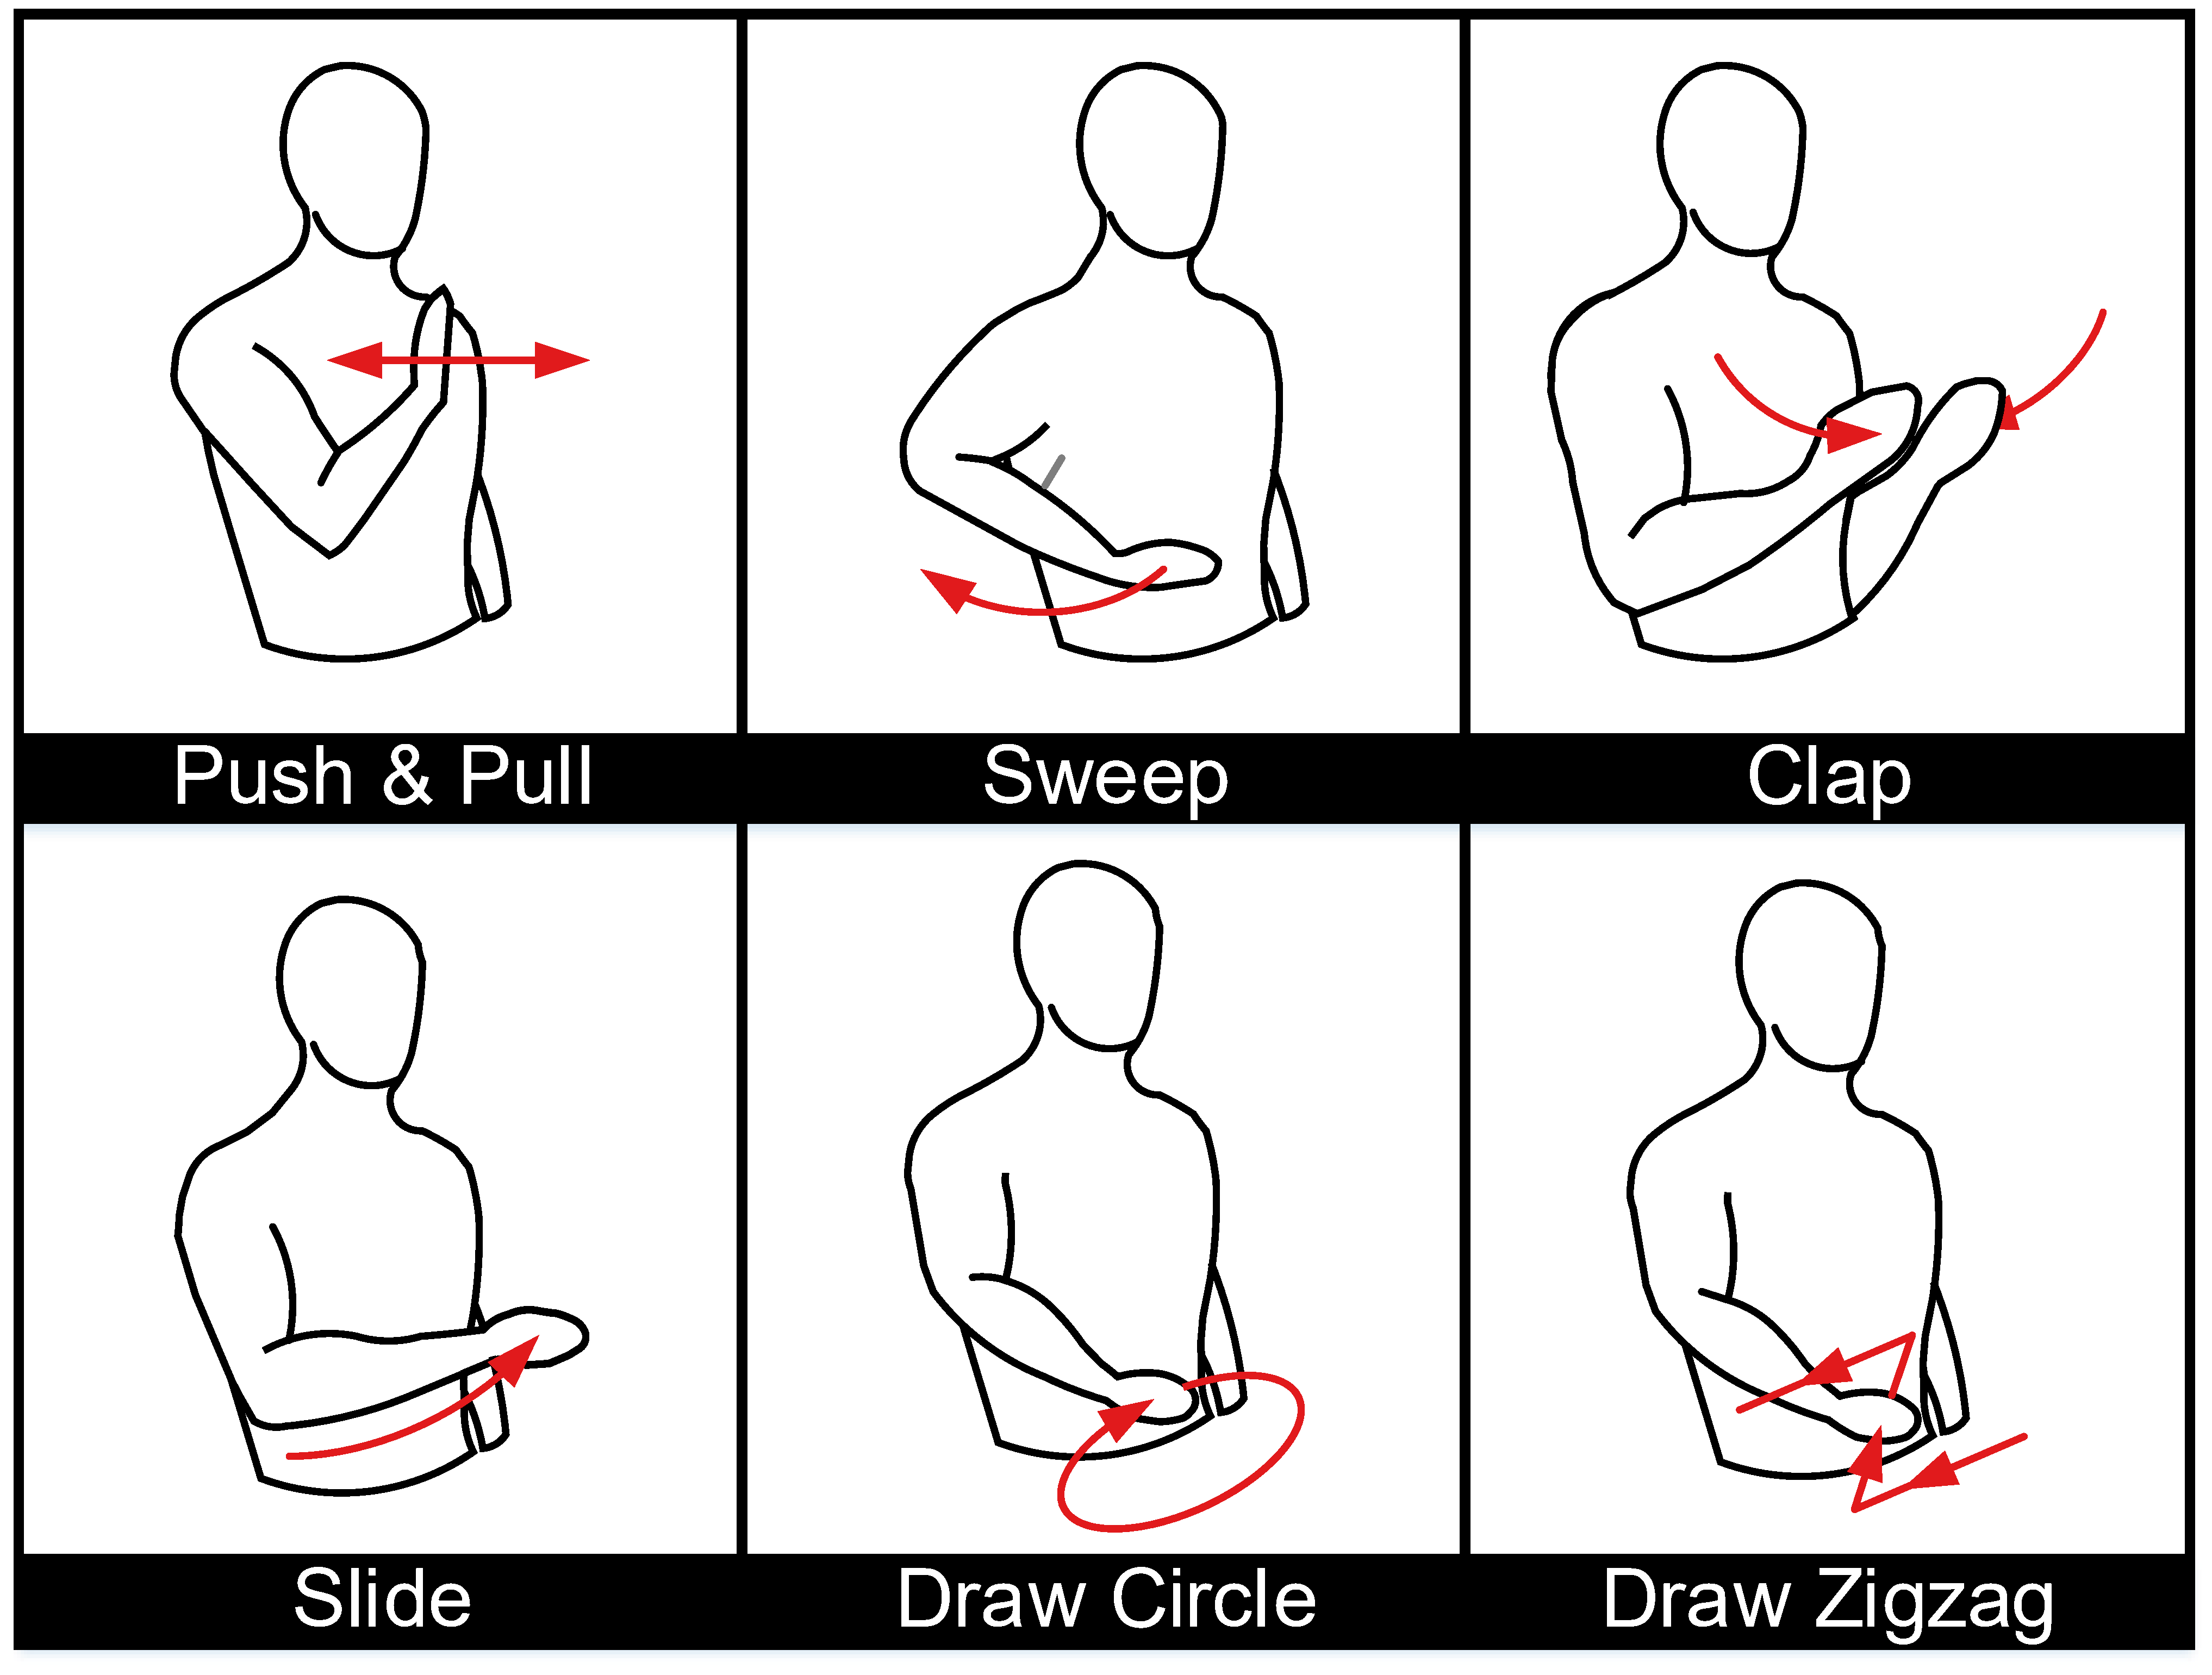 Sketches of gestures evaluated in the experiment.